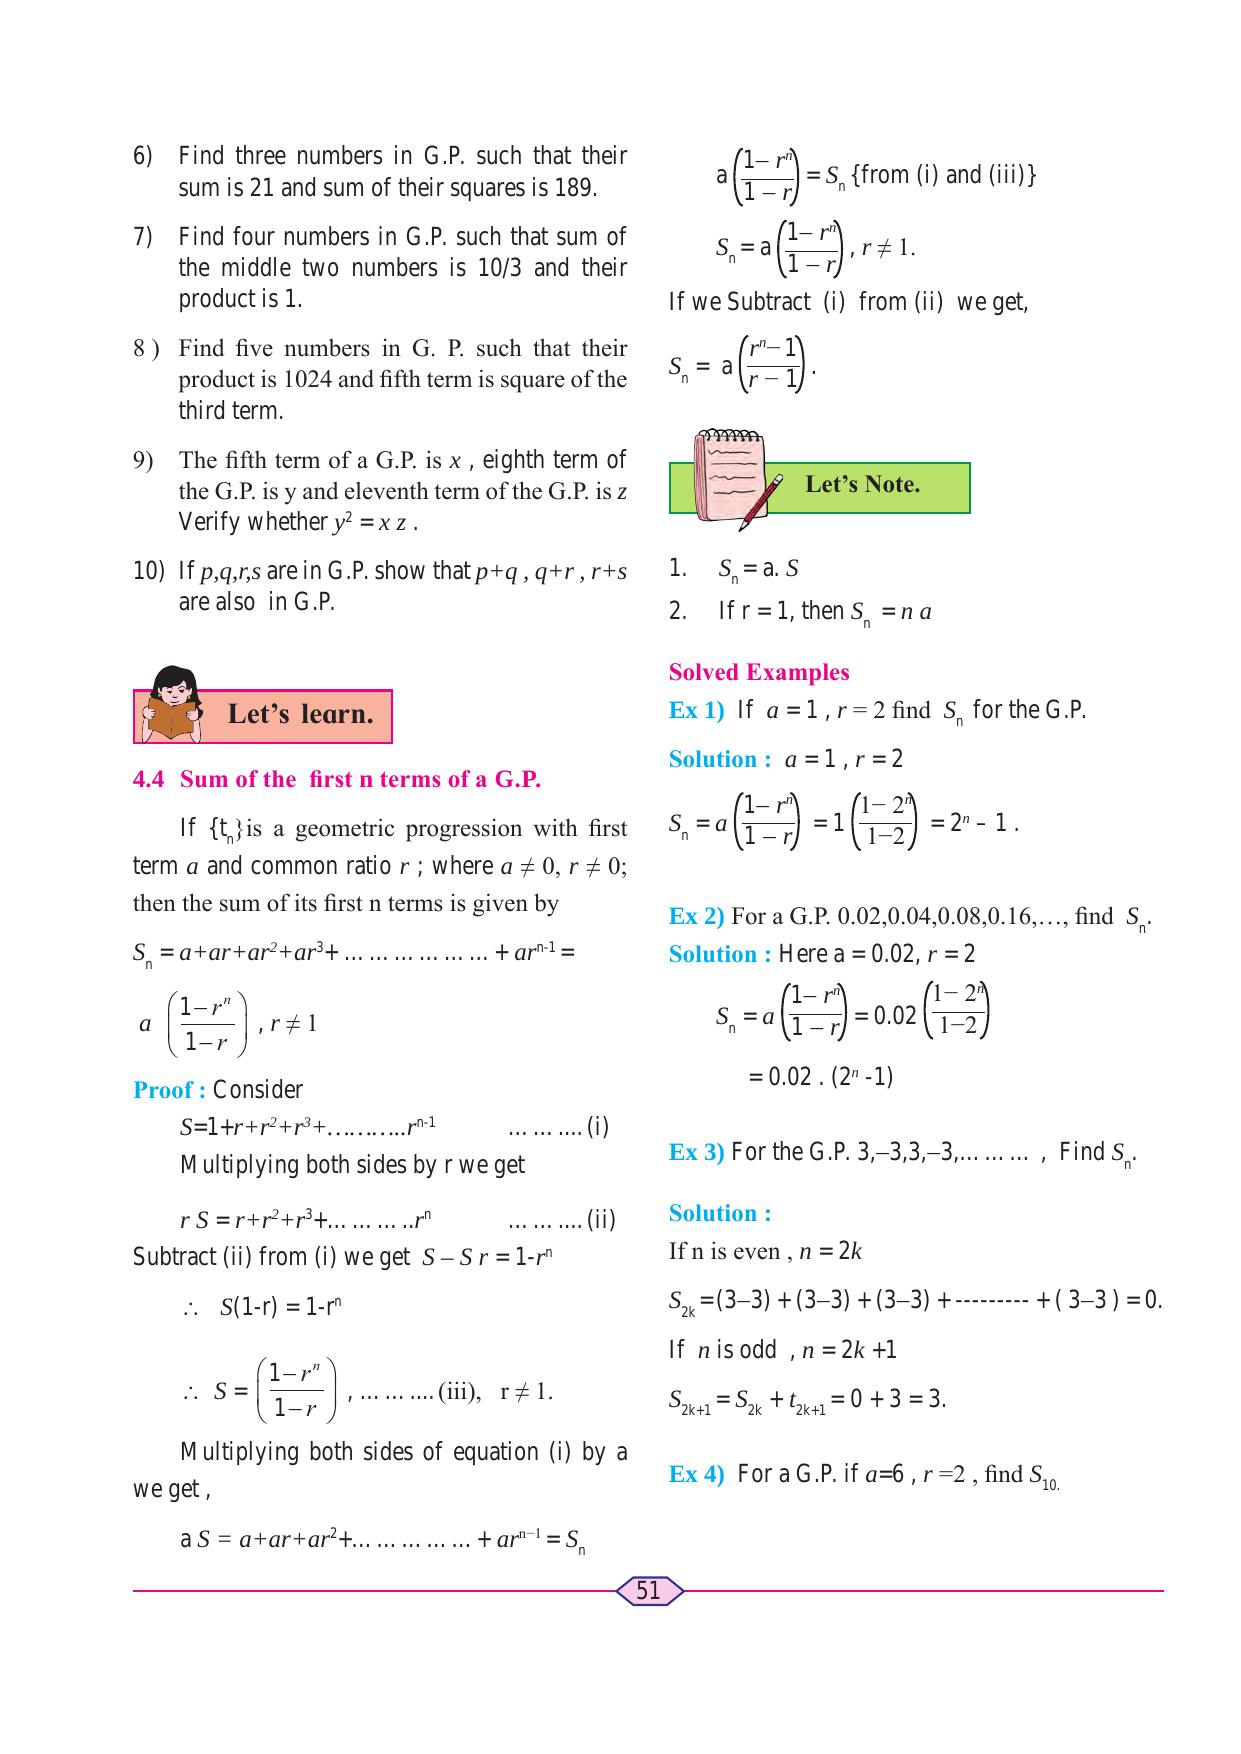 Maharashtra Board Class 11 Maths (Commerce) (Part 1) Textbook - Page 61